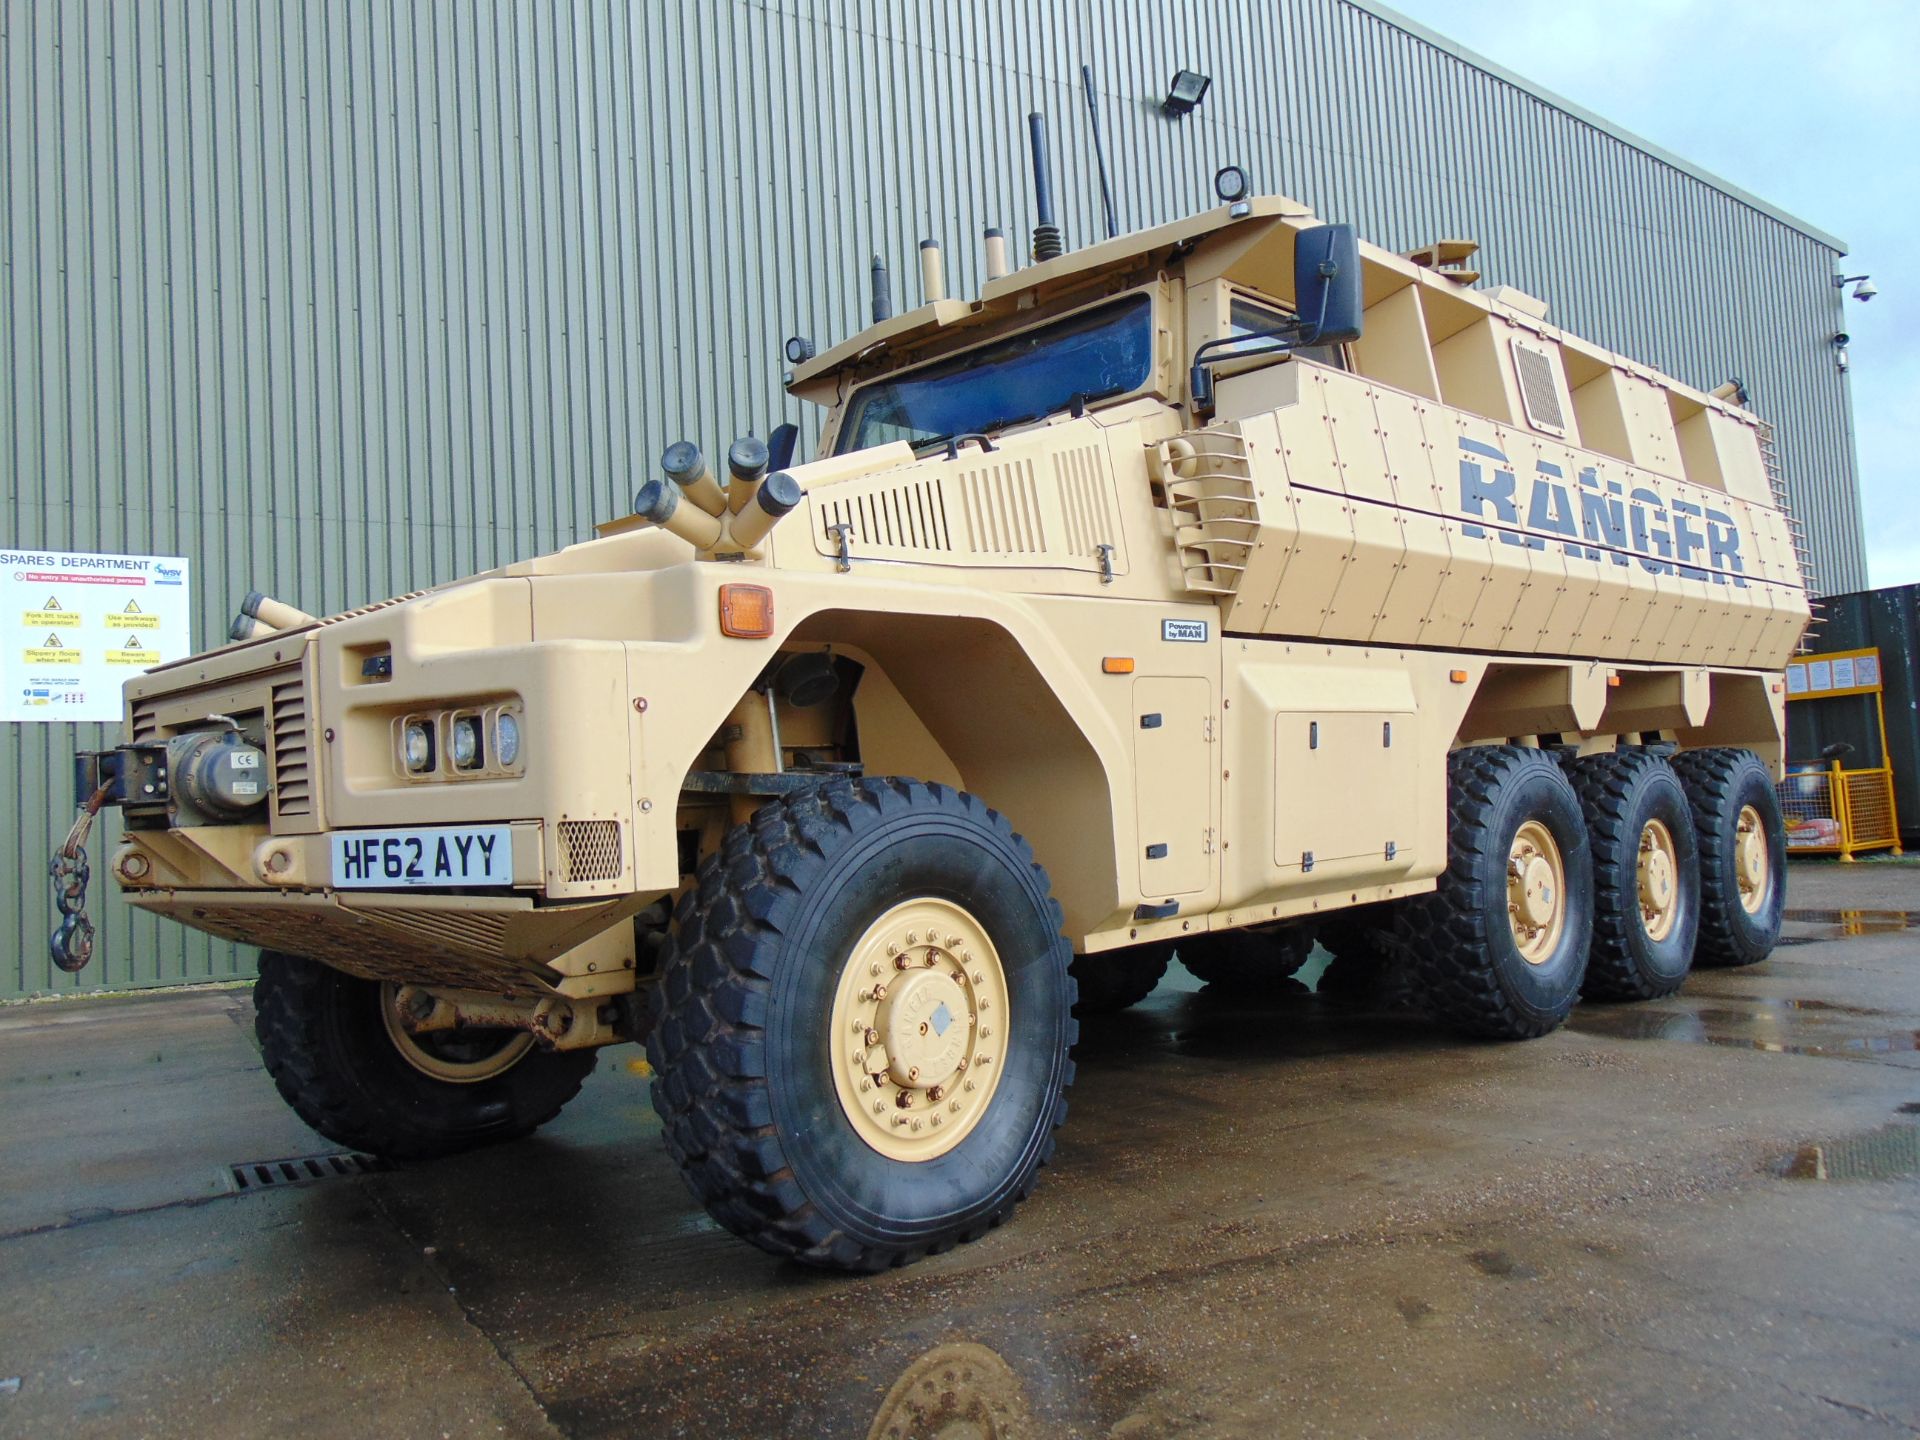 2012 RANGER 8x8 Armoured Personnel Carrier ONLY 1,354 MILES! - Image 33 of 46